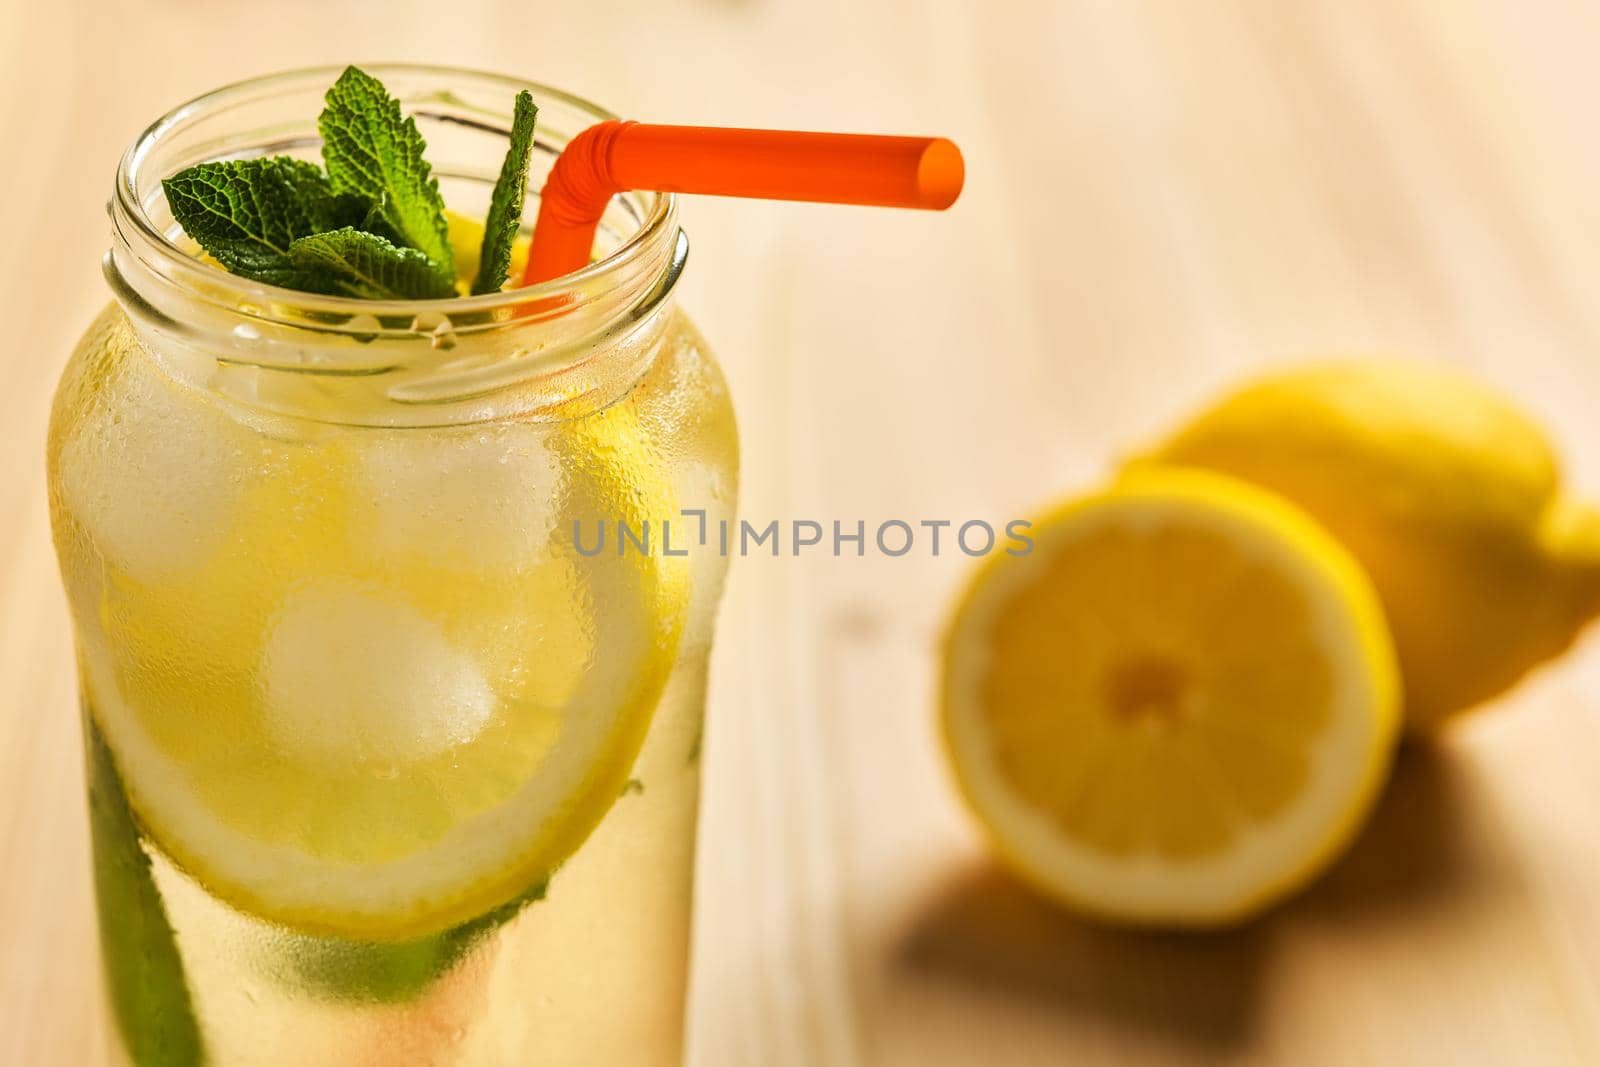 Close-up of the top of a glass jar with lemonade on a wooden table and some unfocused lemons in the background. The jug contains water, slices of lemon, ice, mint leaves and a cane to drink